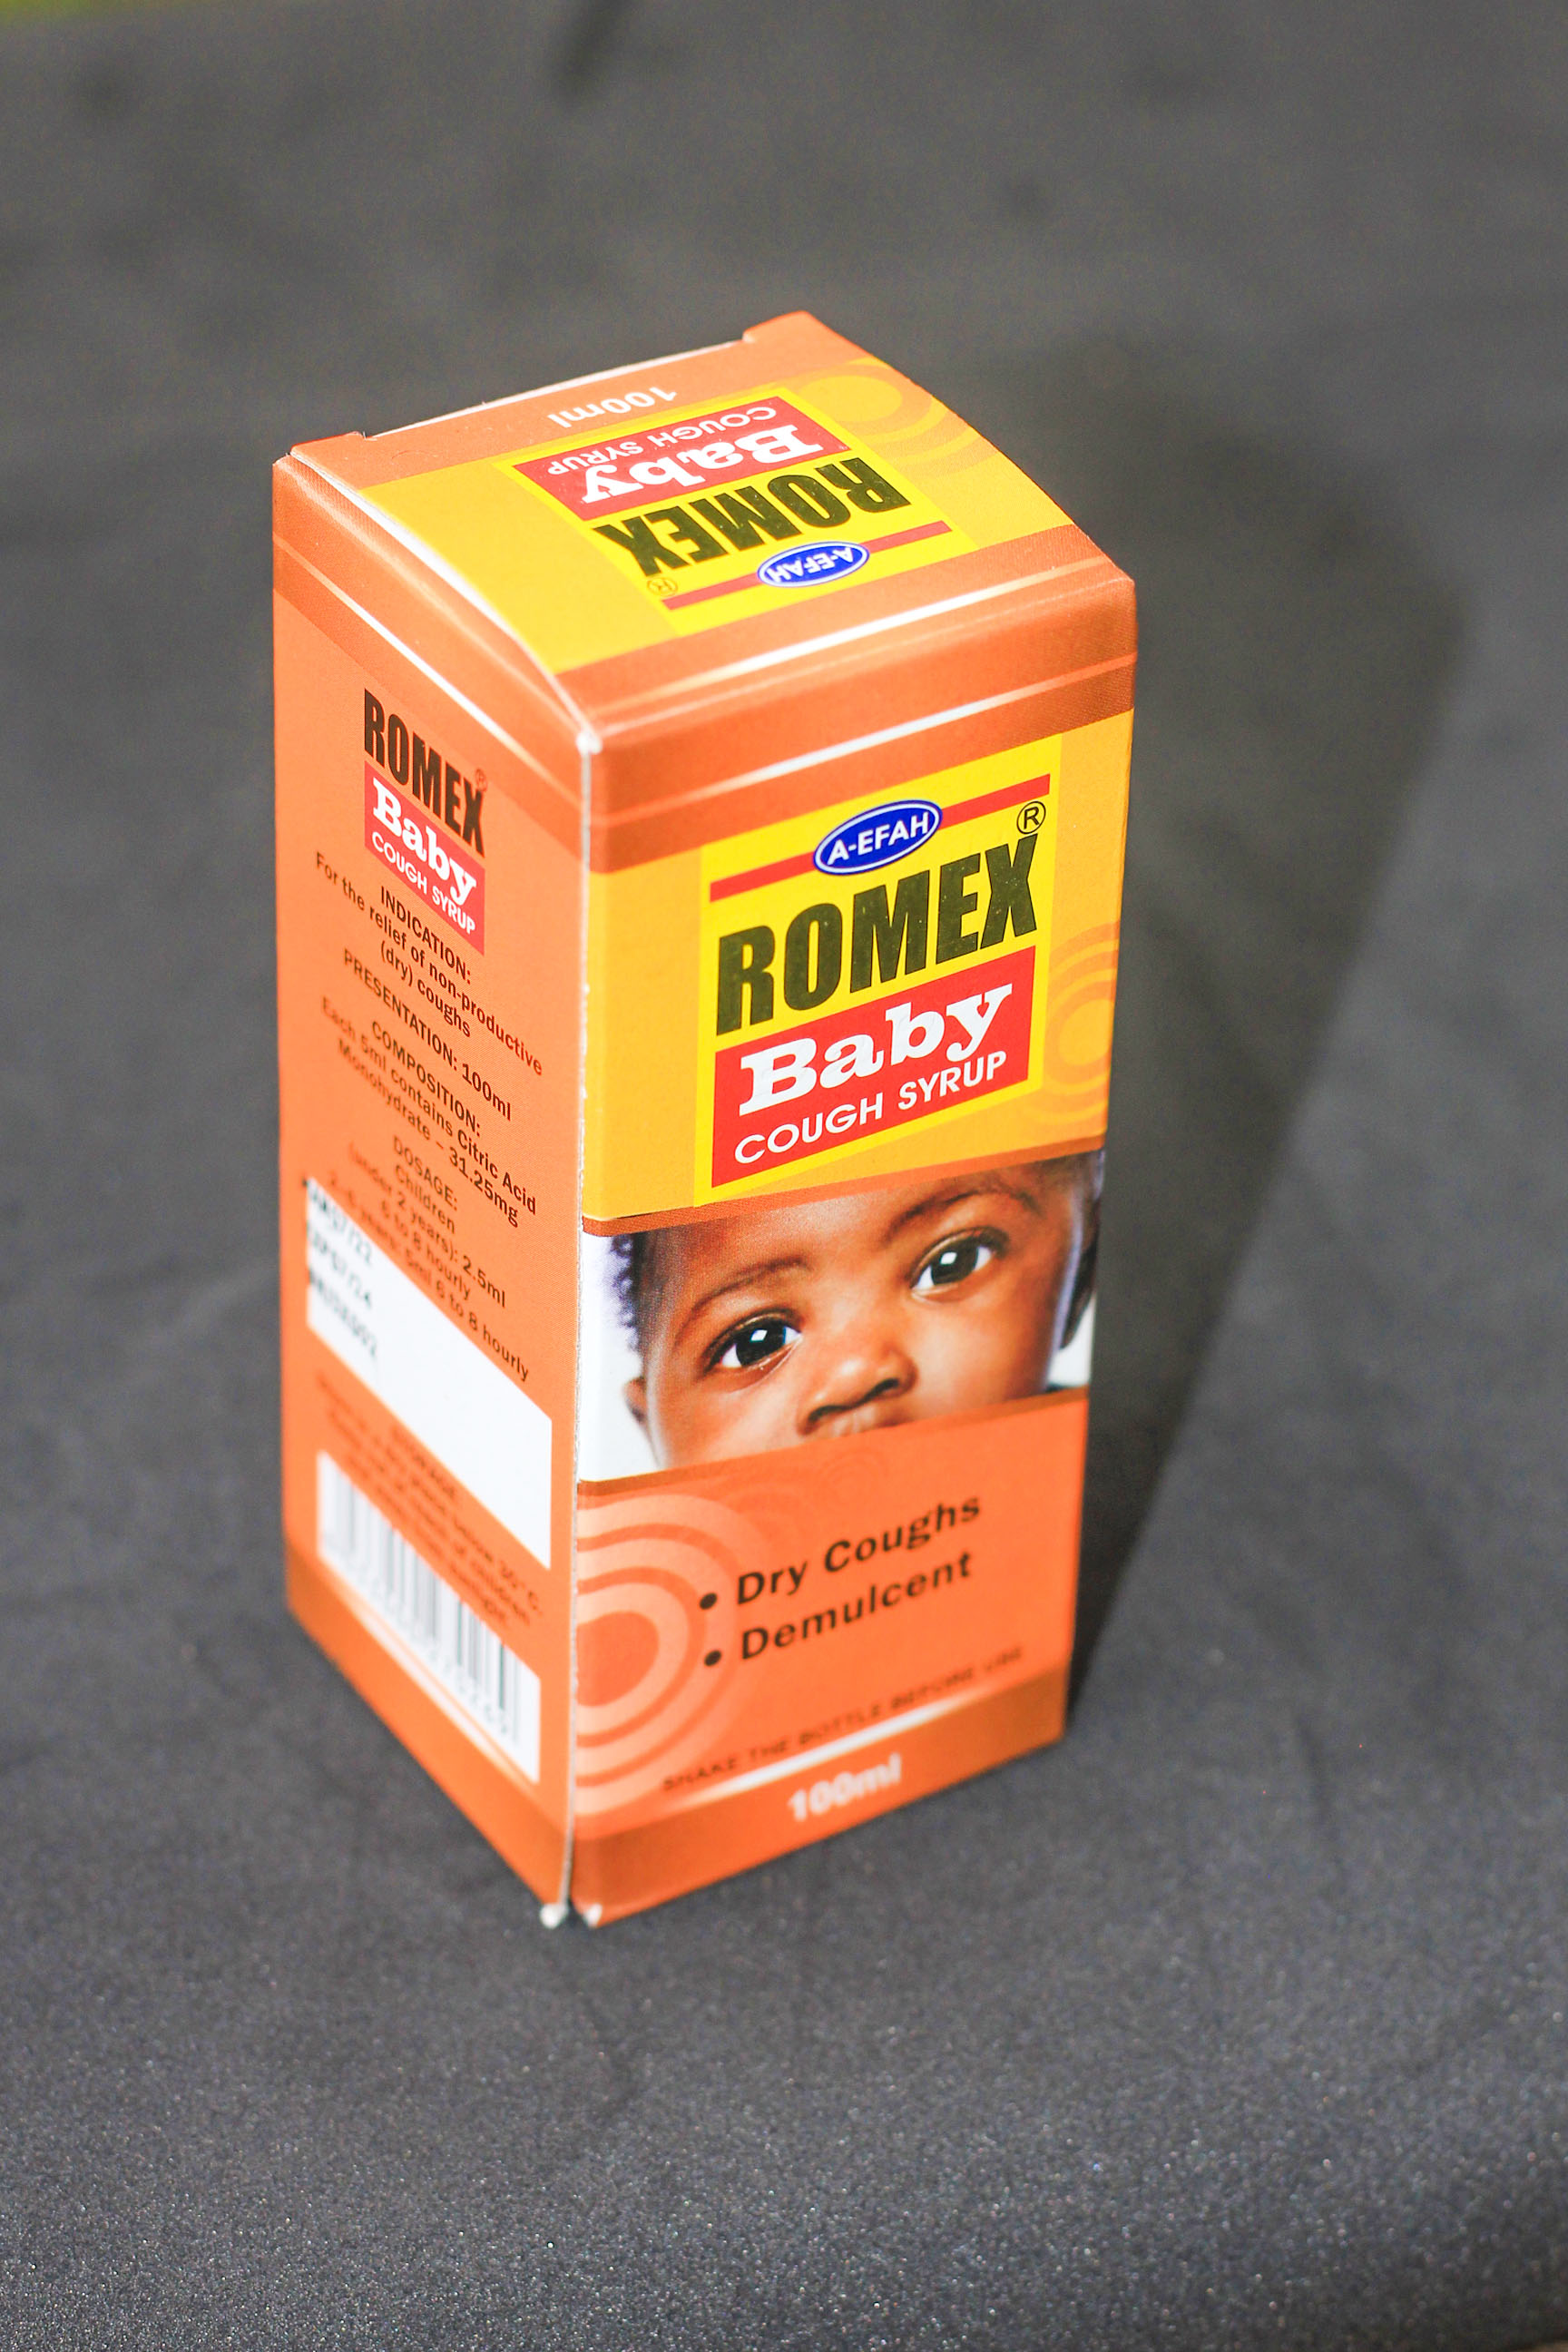 Romex Baby Cough Syrup